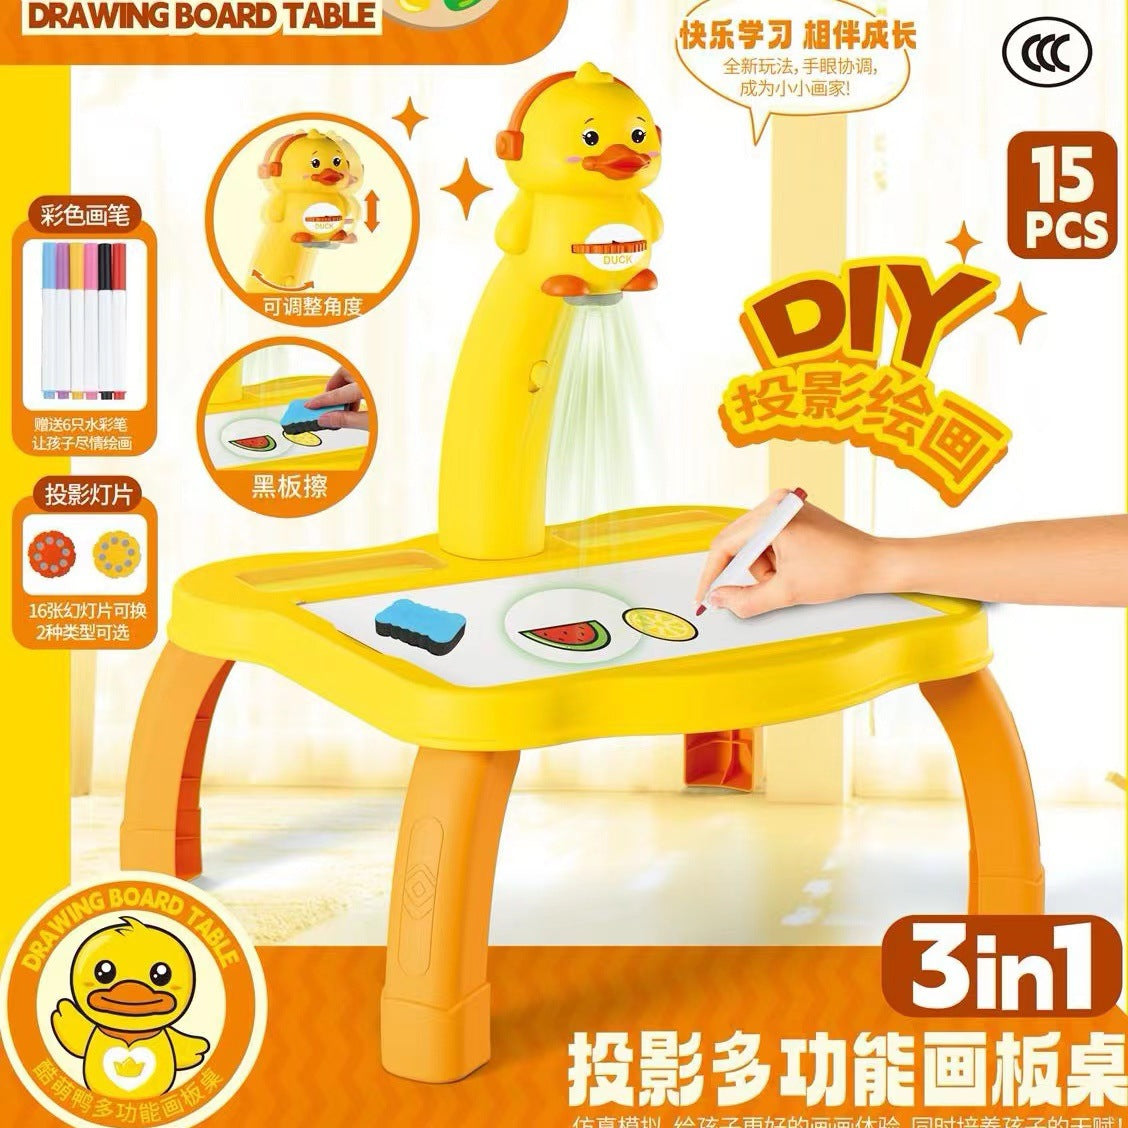 Duck Children's projection table multi-functional drawing board